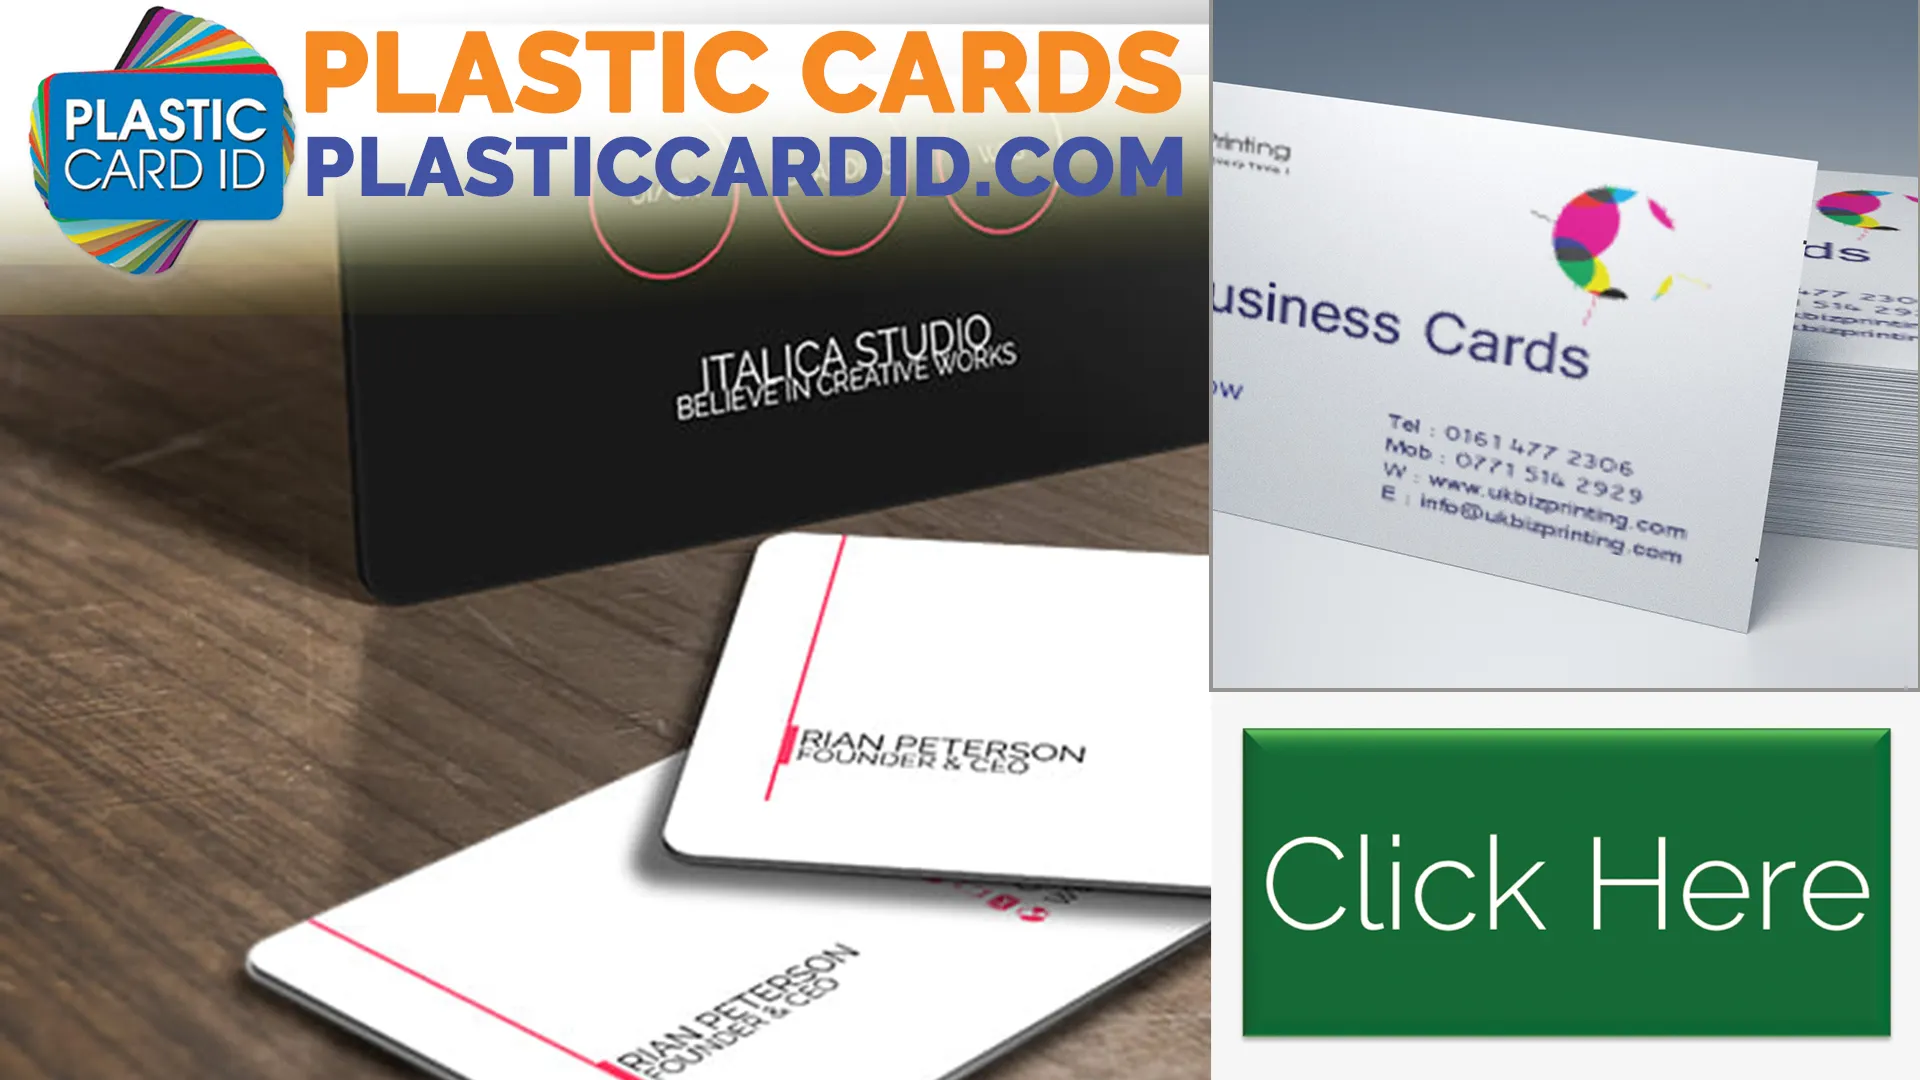 Welcome to the World of Plastic Card Design Excellence